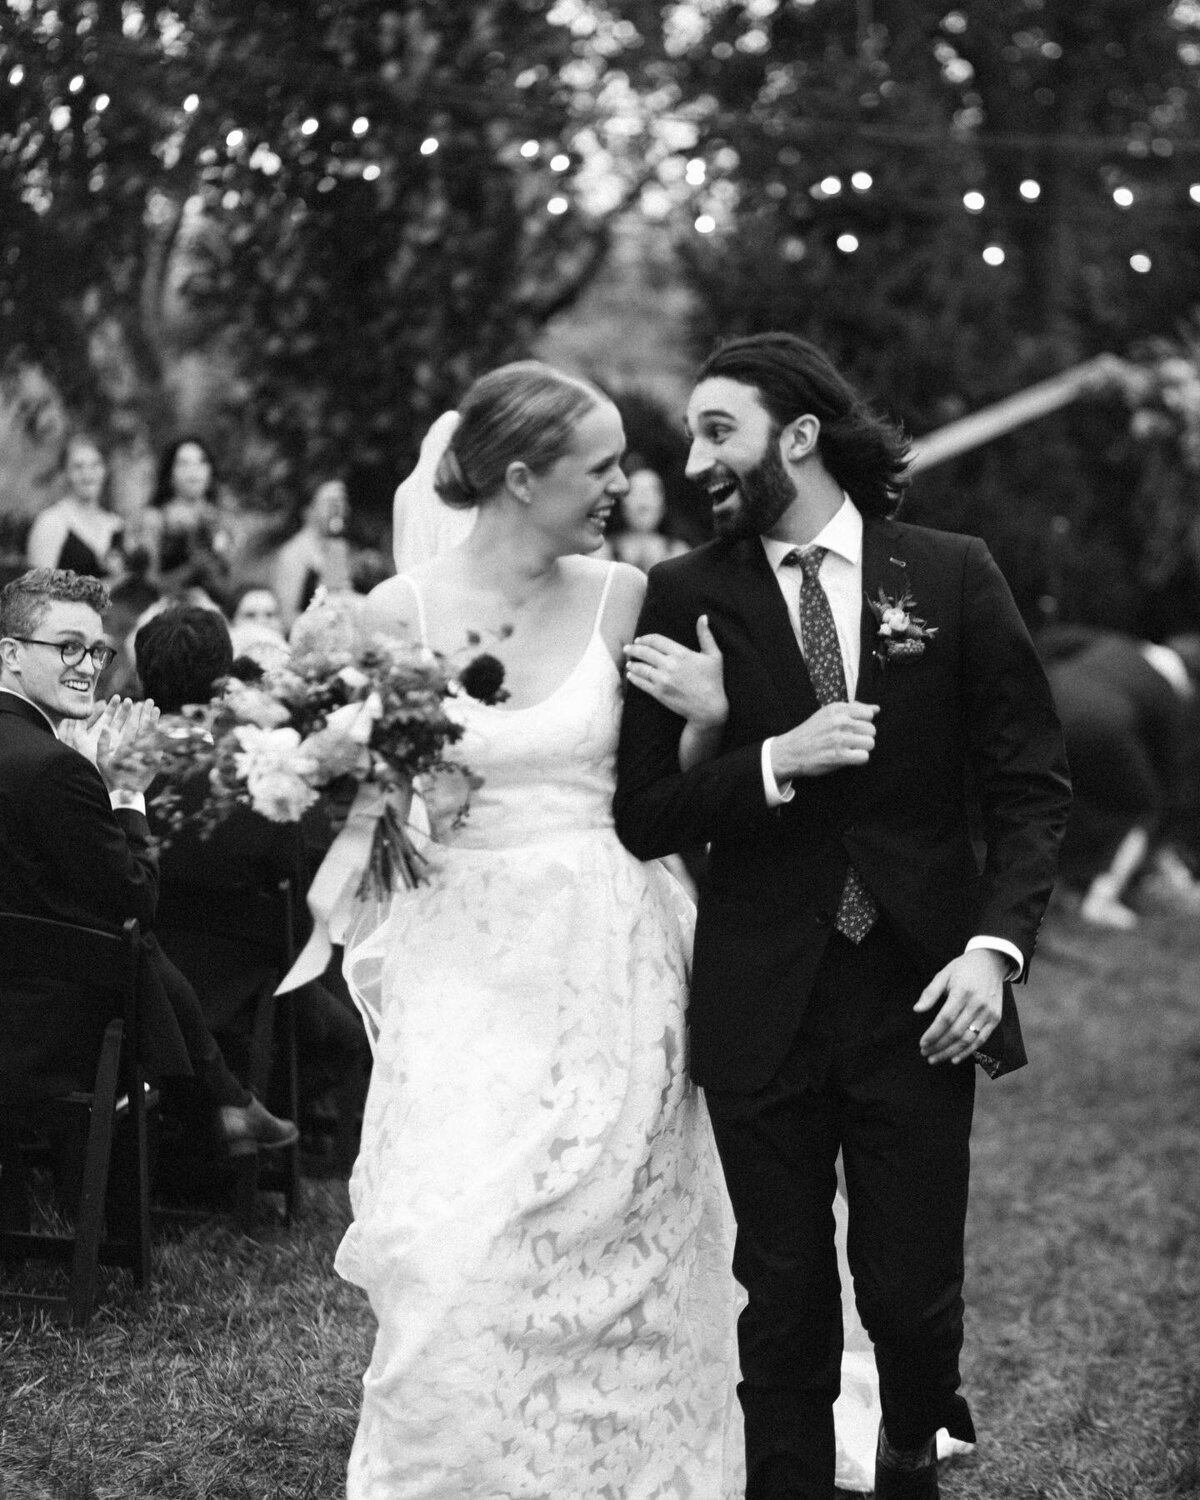 Black and white image of couple excited after wedding ceremony